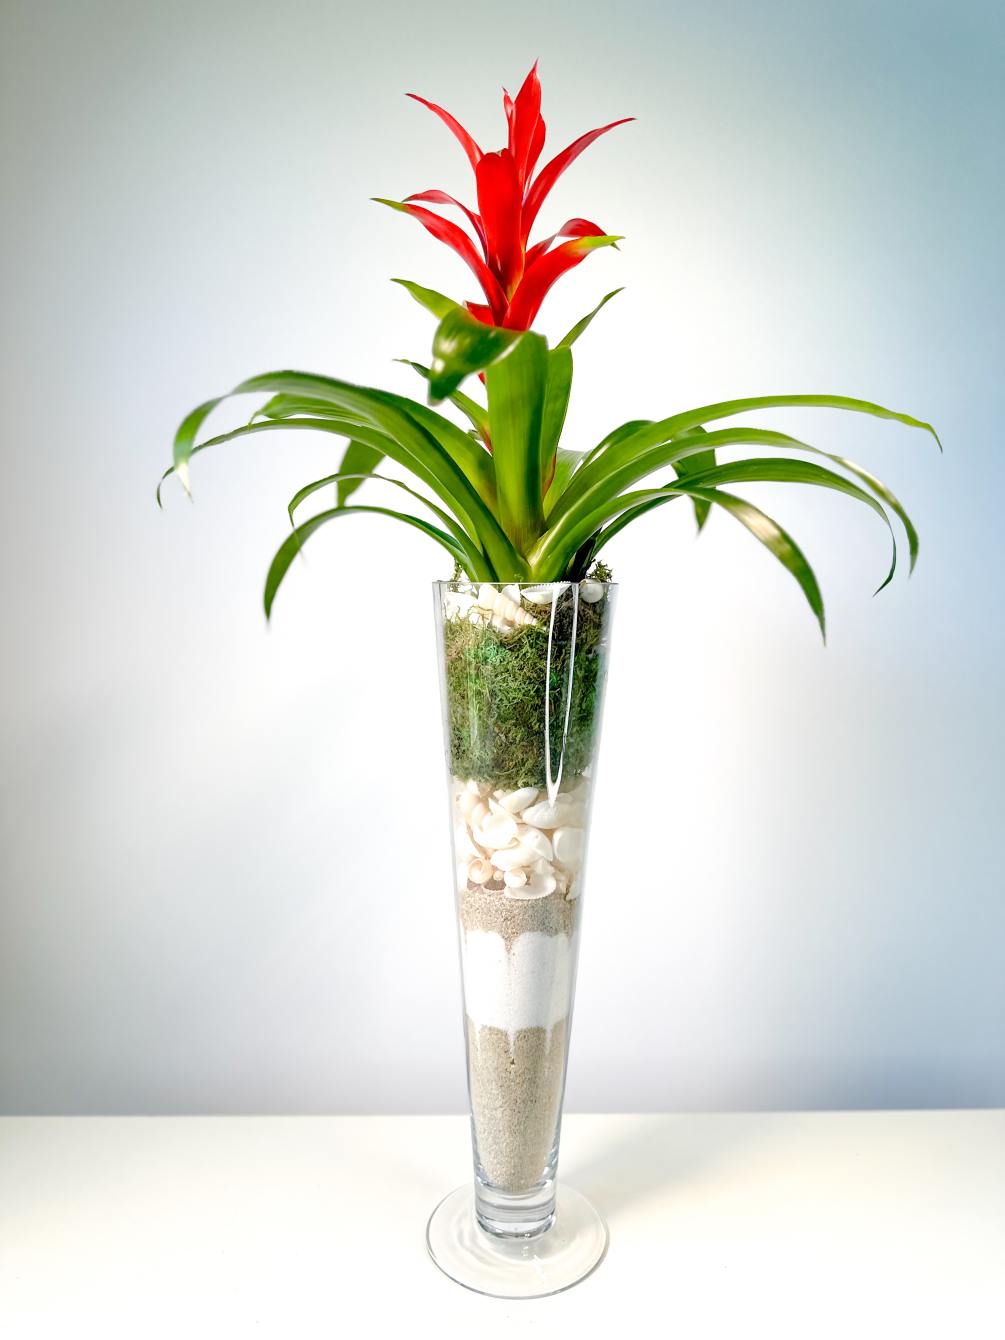  Bromeliad plant arranged in a tall glass trumpet vase accented with